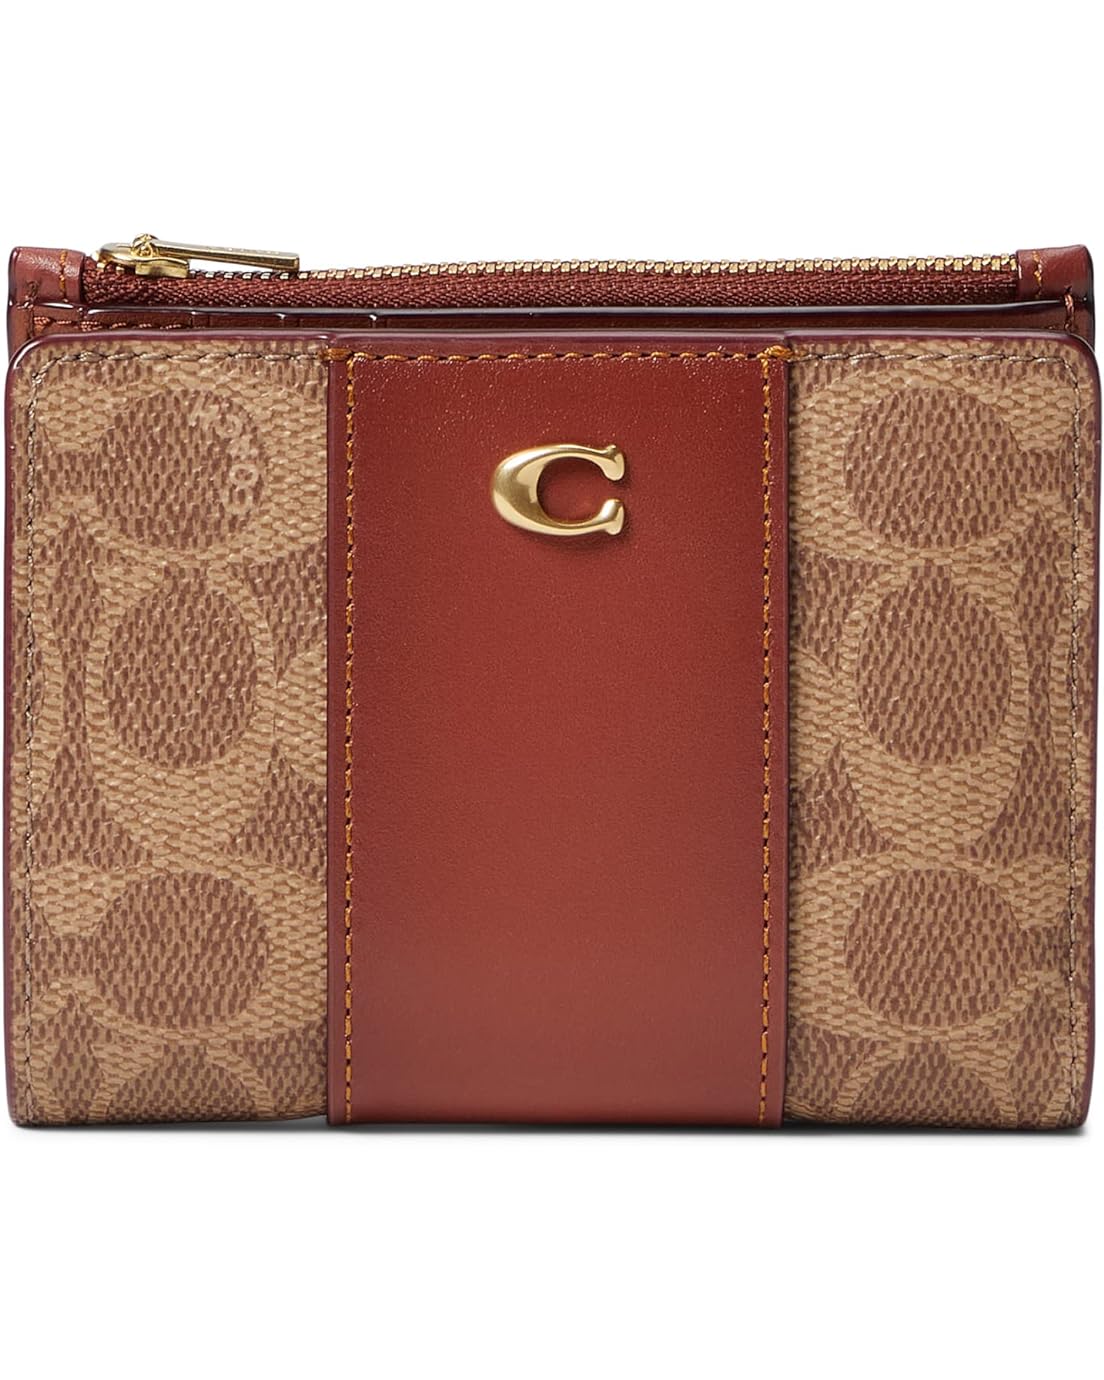 COACH Coated Canvas Signature Bifold Snap Wallet